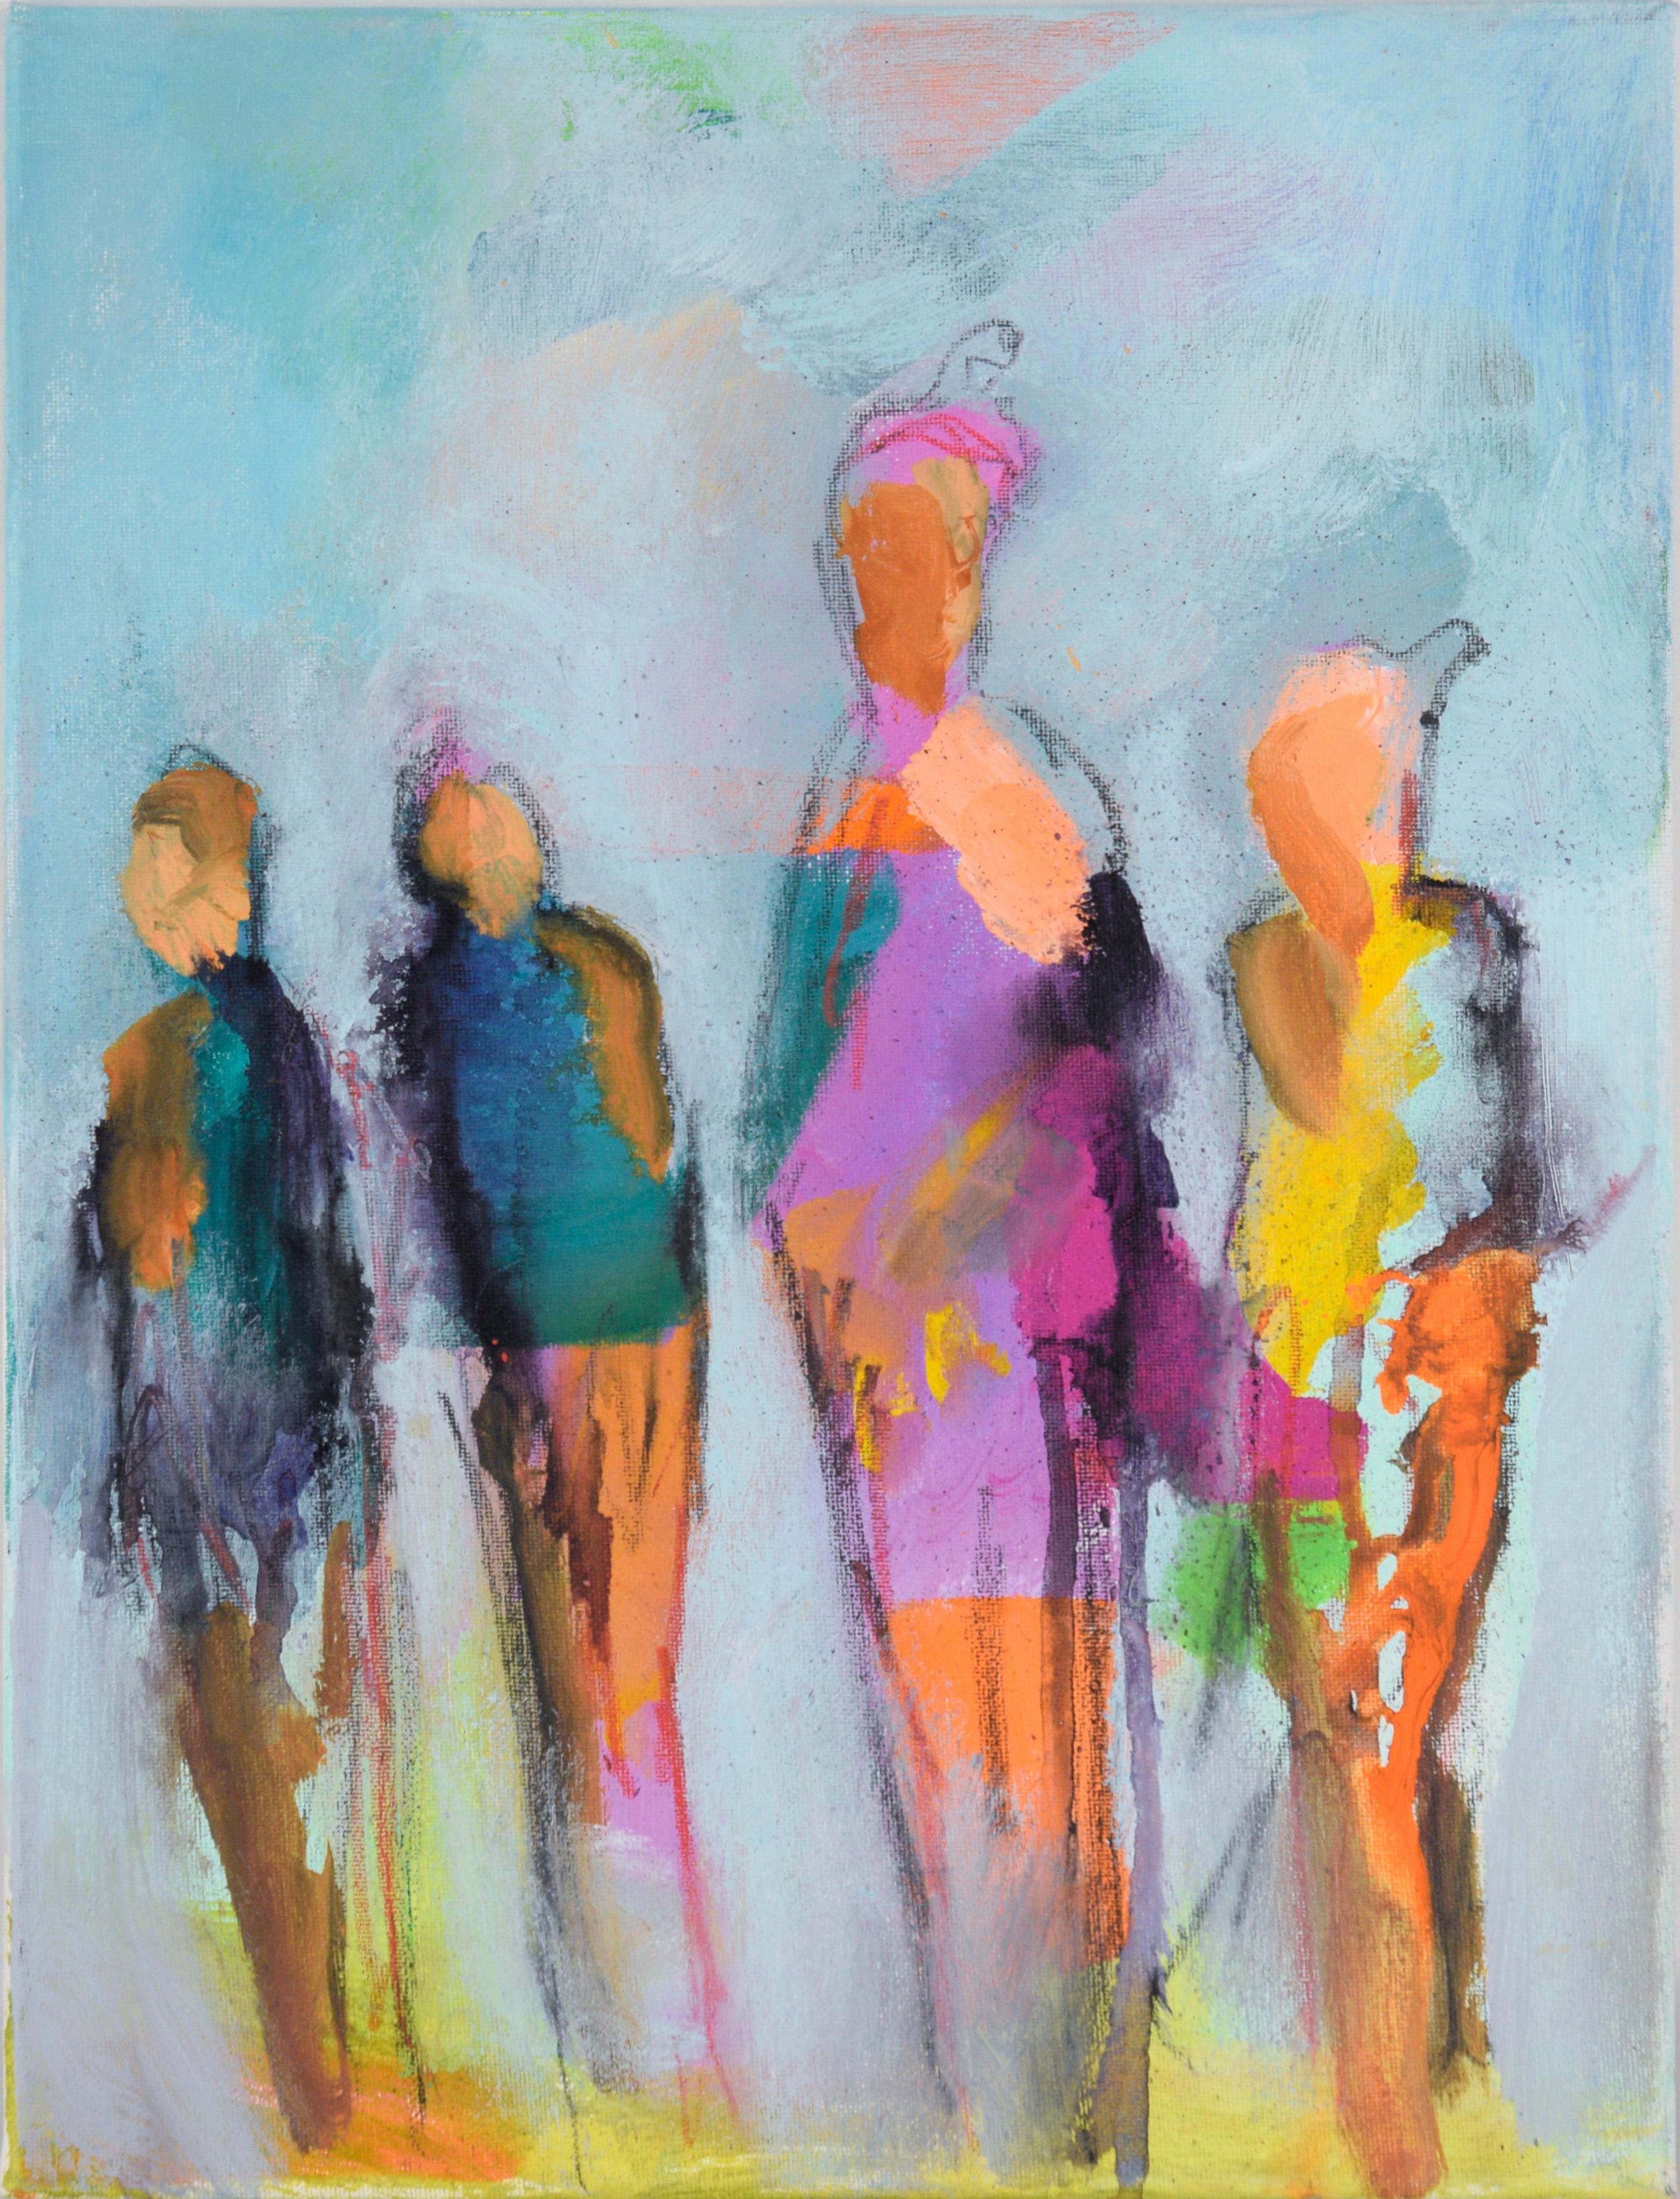 Ilana Ingber Abstract Painting - "The Outing" - Abstract Figurative